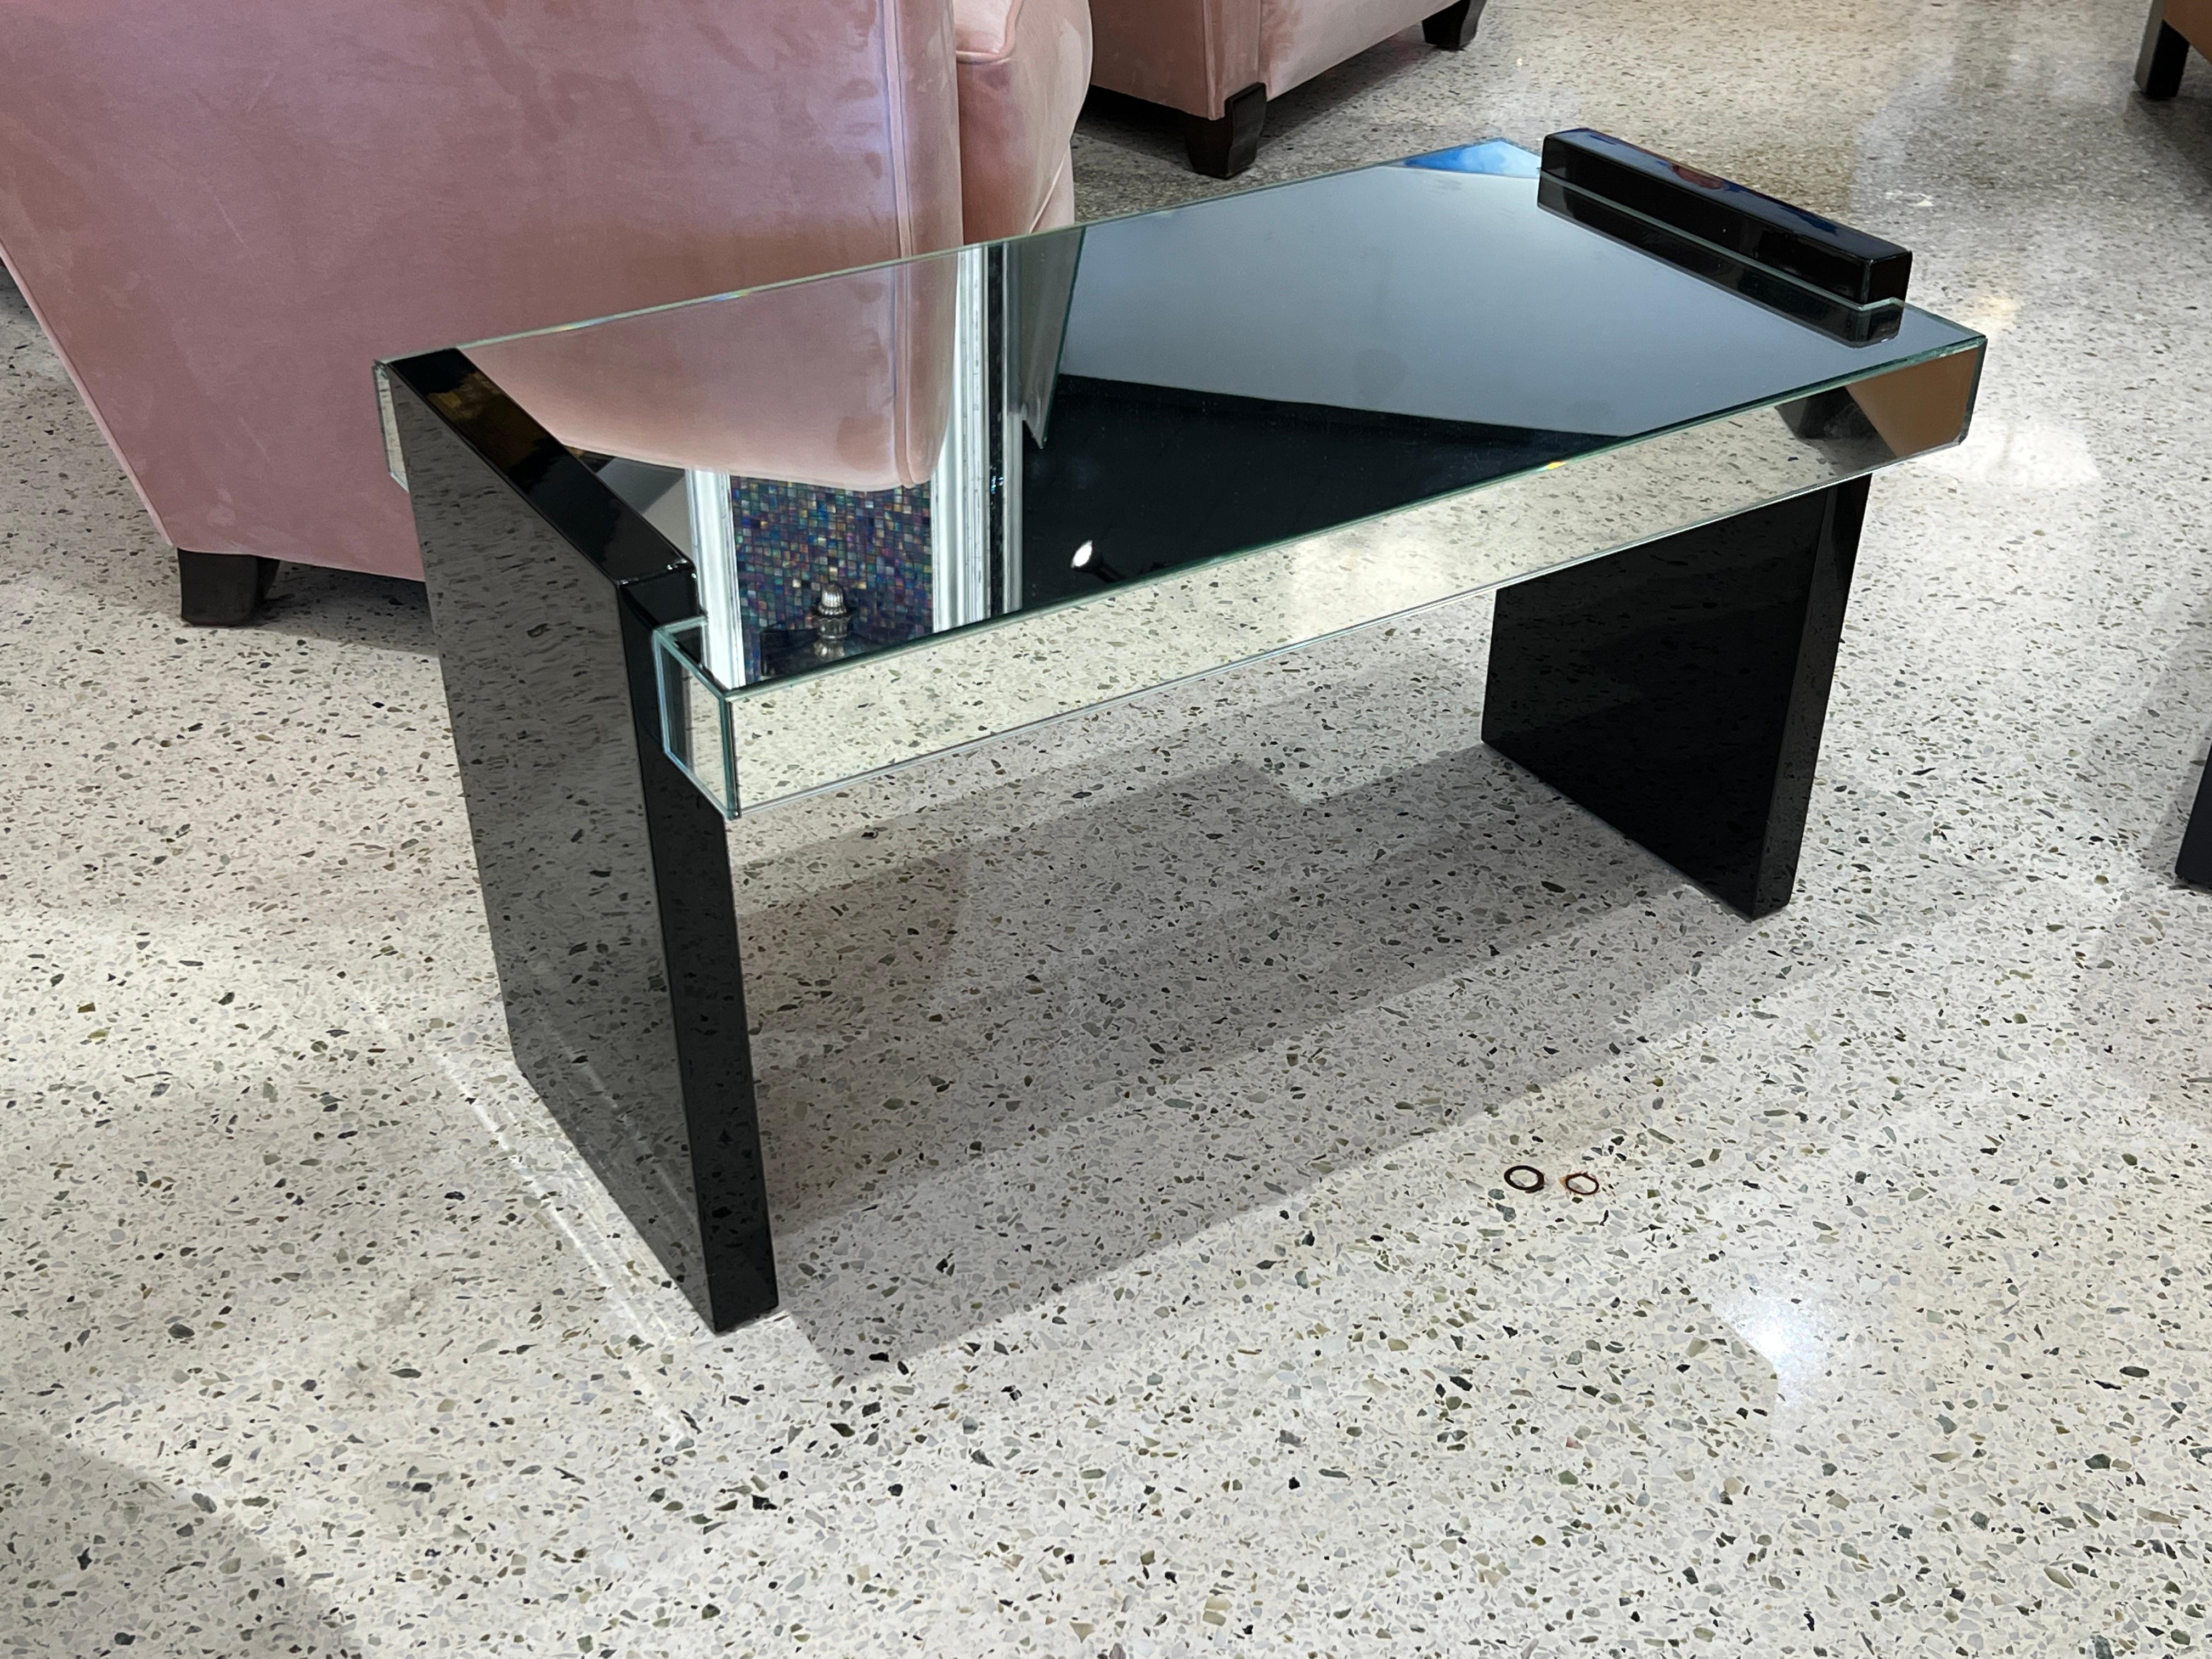 Art Deco rectangular side table in black Lacquer with mirror top by Jacques Adnet.

Jacques Adnet was an iconic Art Deco French designer. His designs featured clean lines, simple shapes and contrasting materials, giving them a unique and timeless